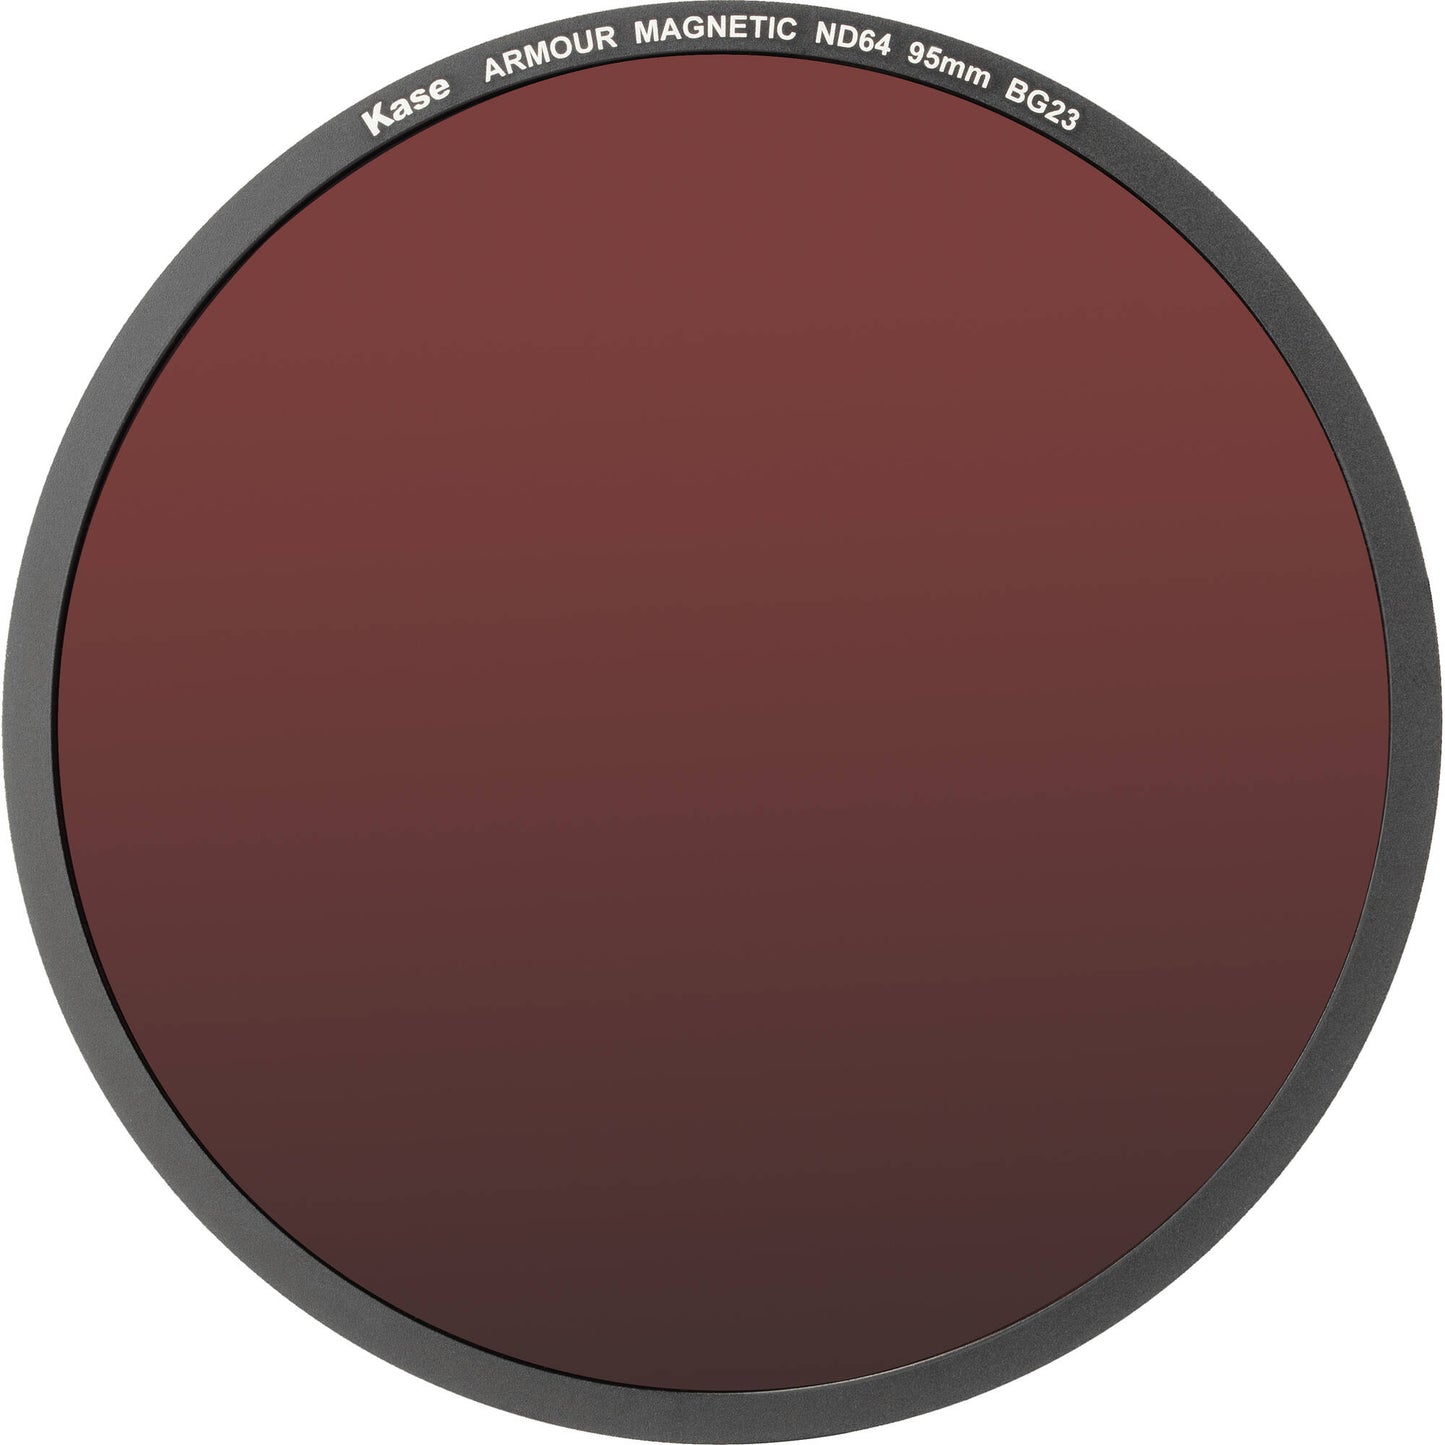 Kase Armour Magnetic ND64 6-Stop ND Filter